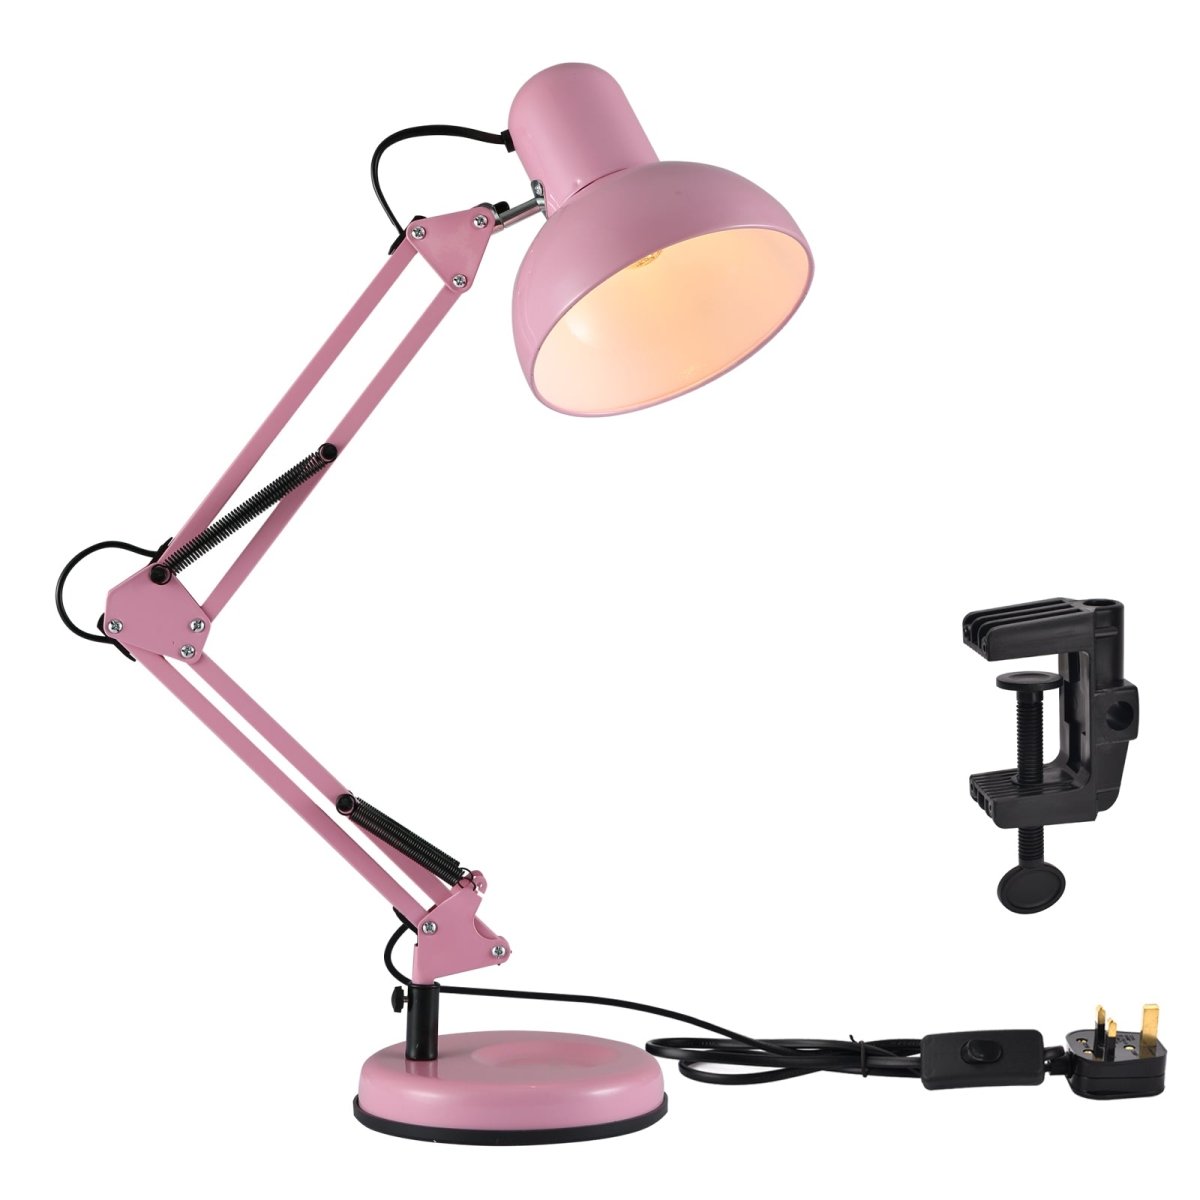 Main image of Atlas Architect Swing Arm Pink Desk Lamp with Clip E27